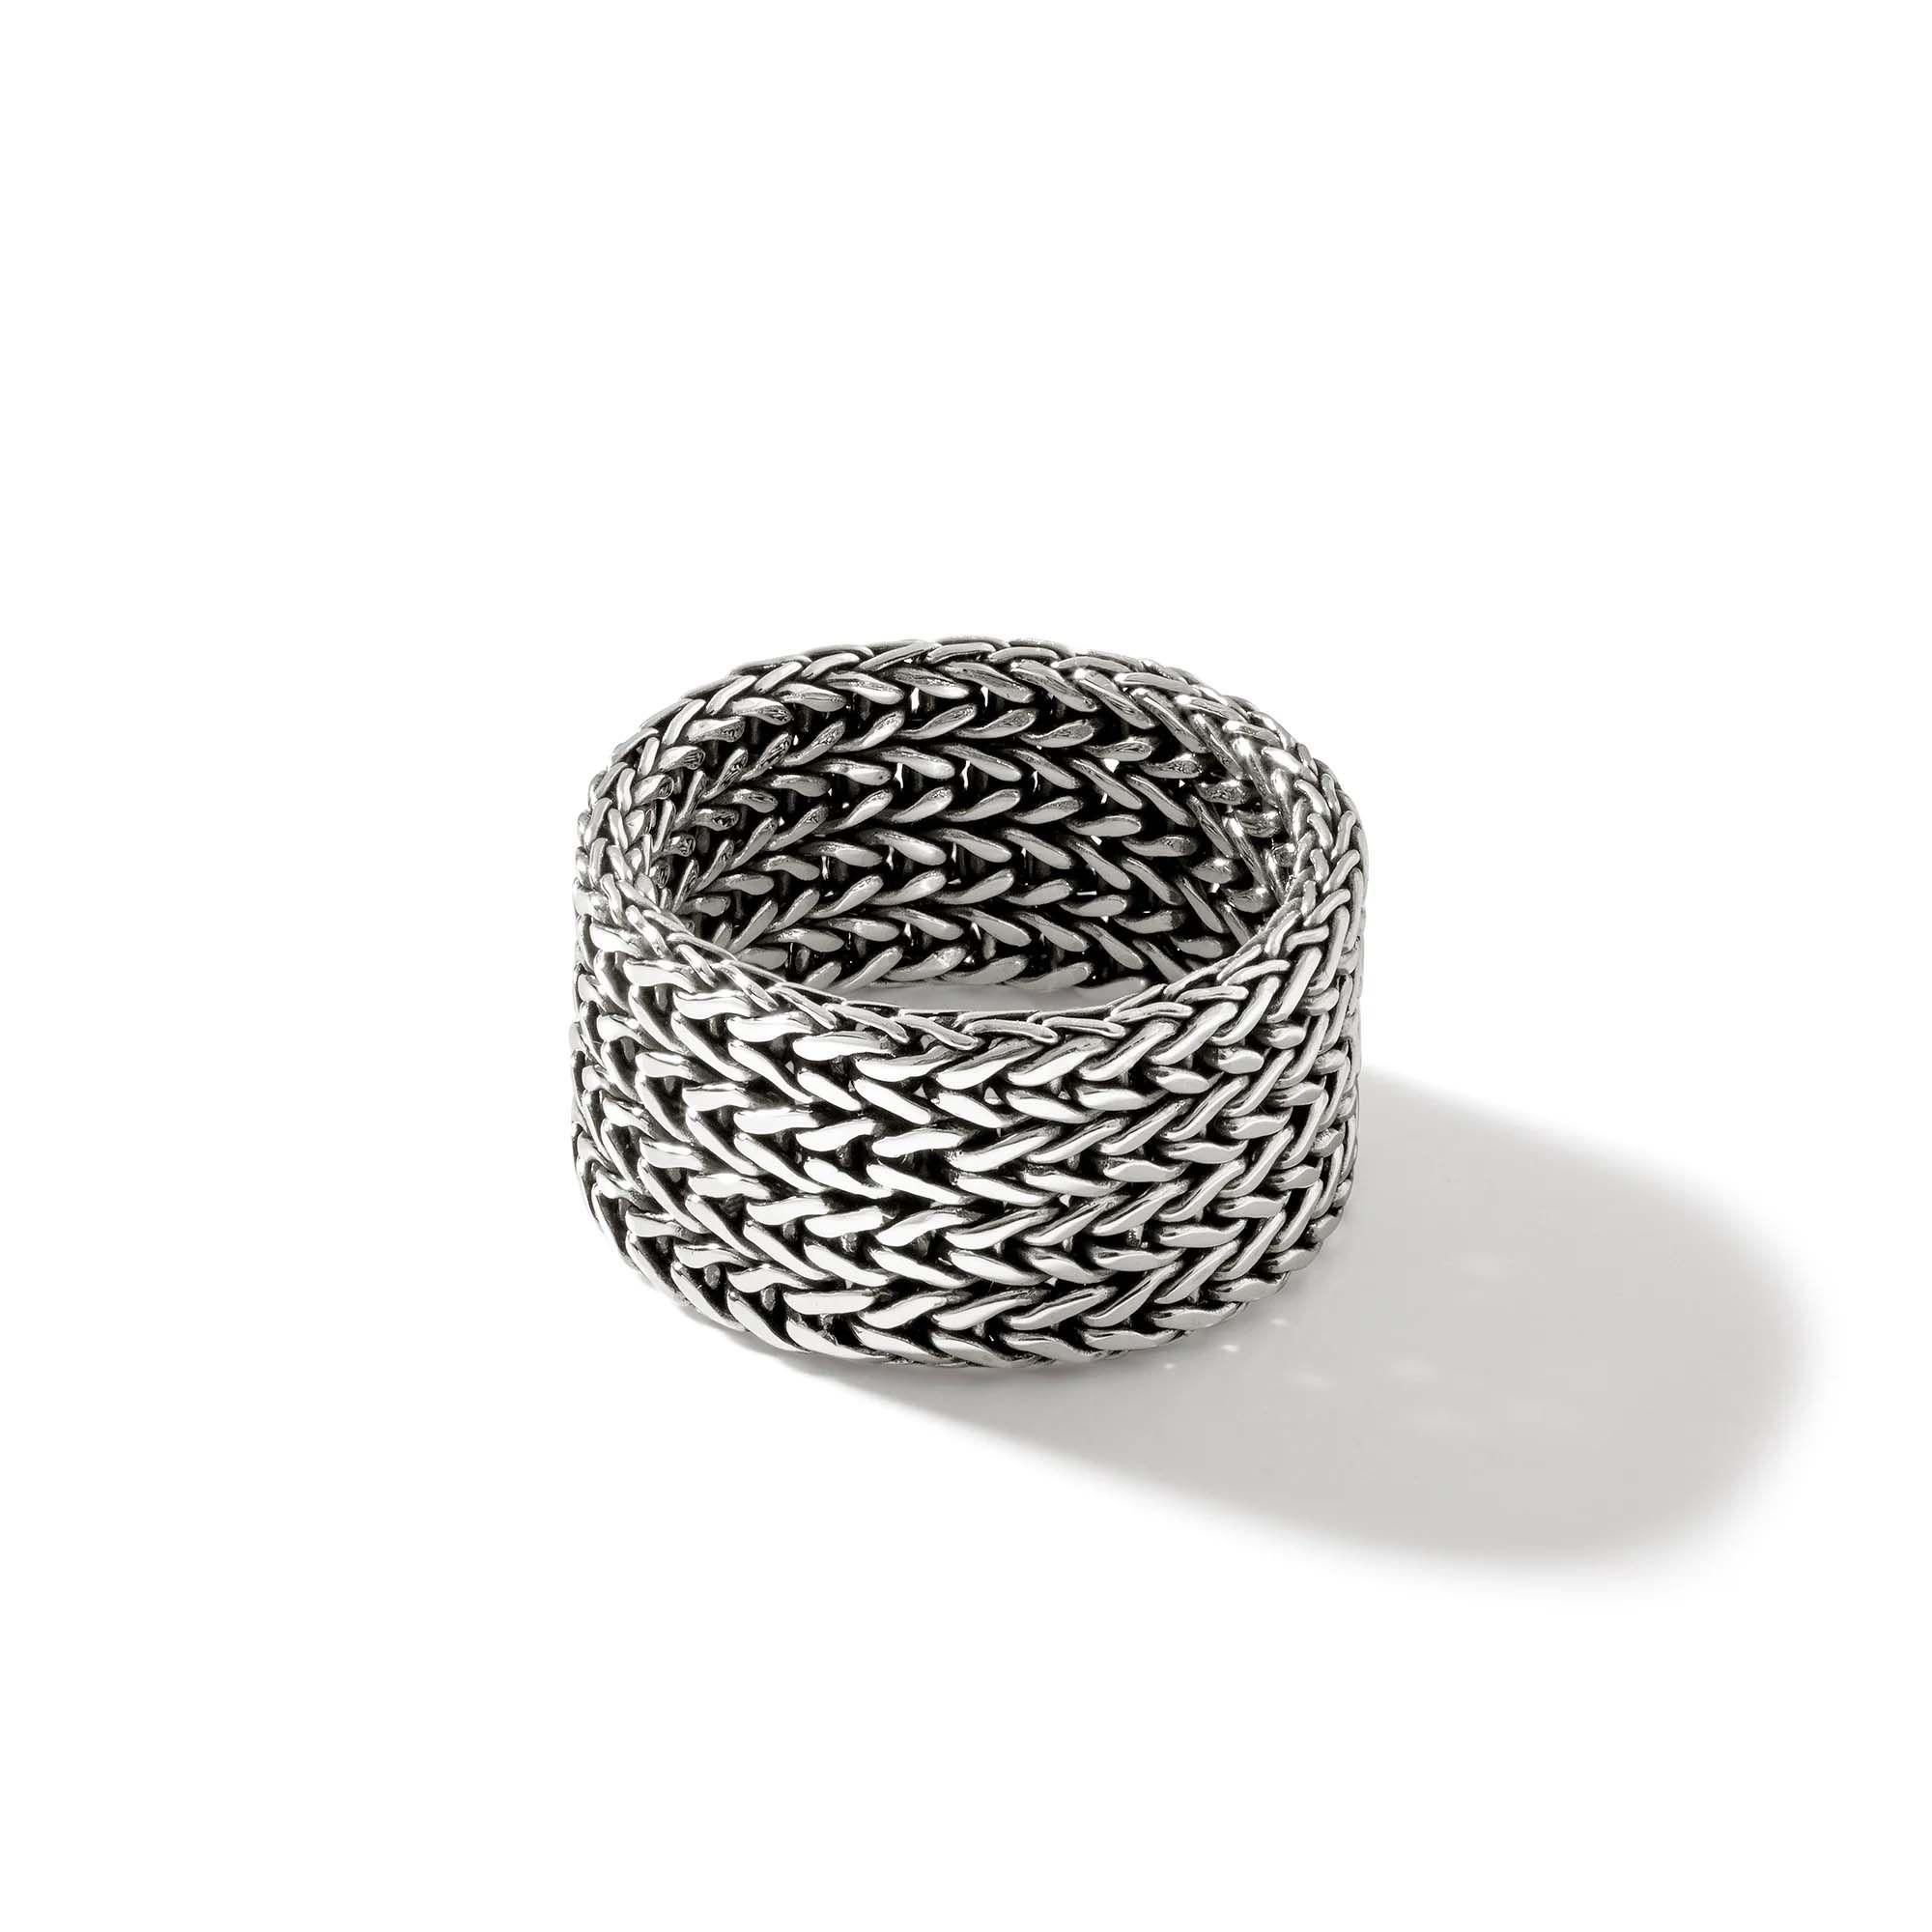 John Hardy Rata 12mm Chain Ring in Sterling Silver 4